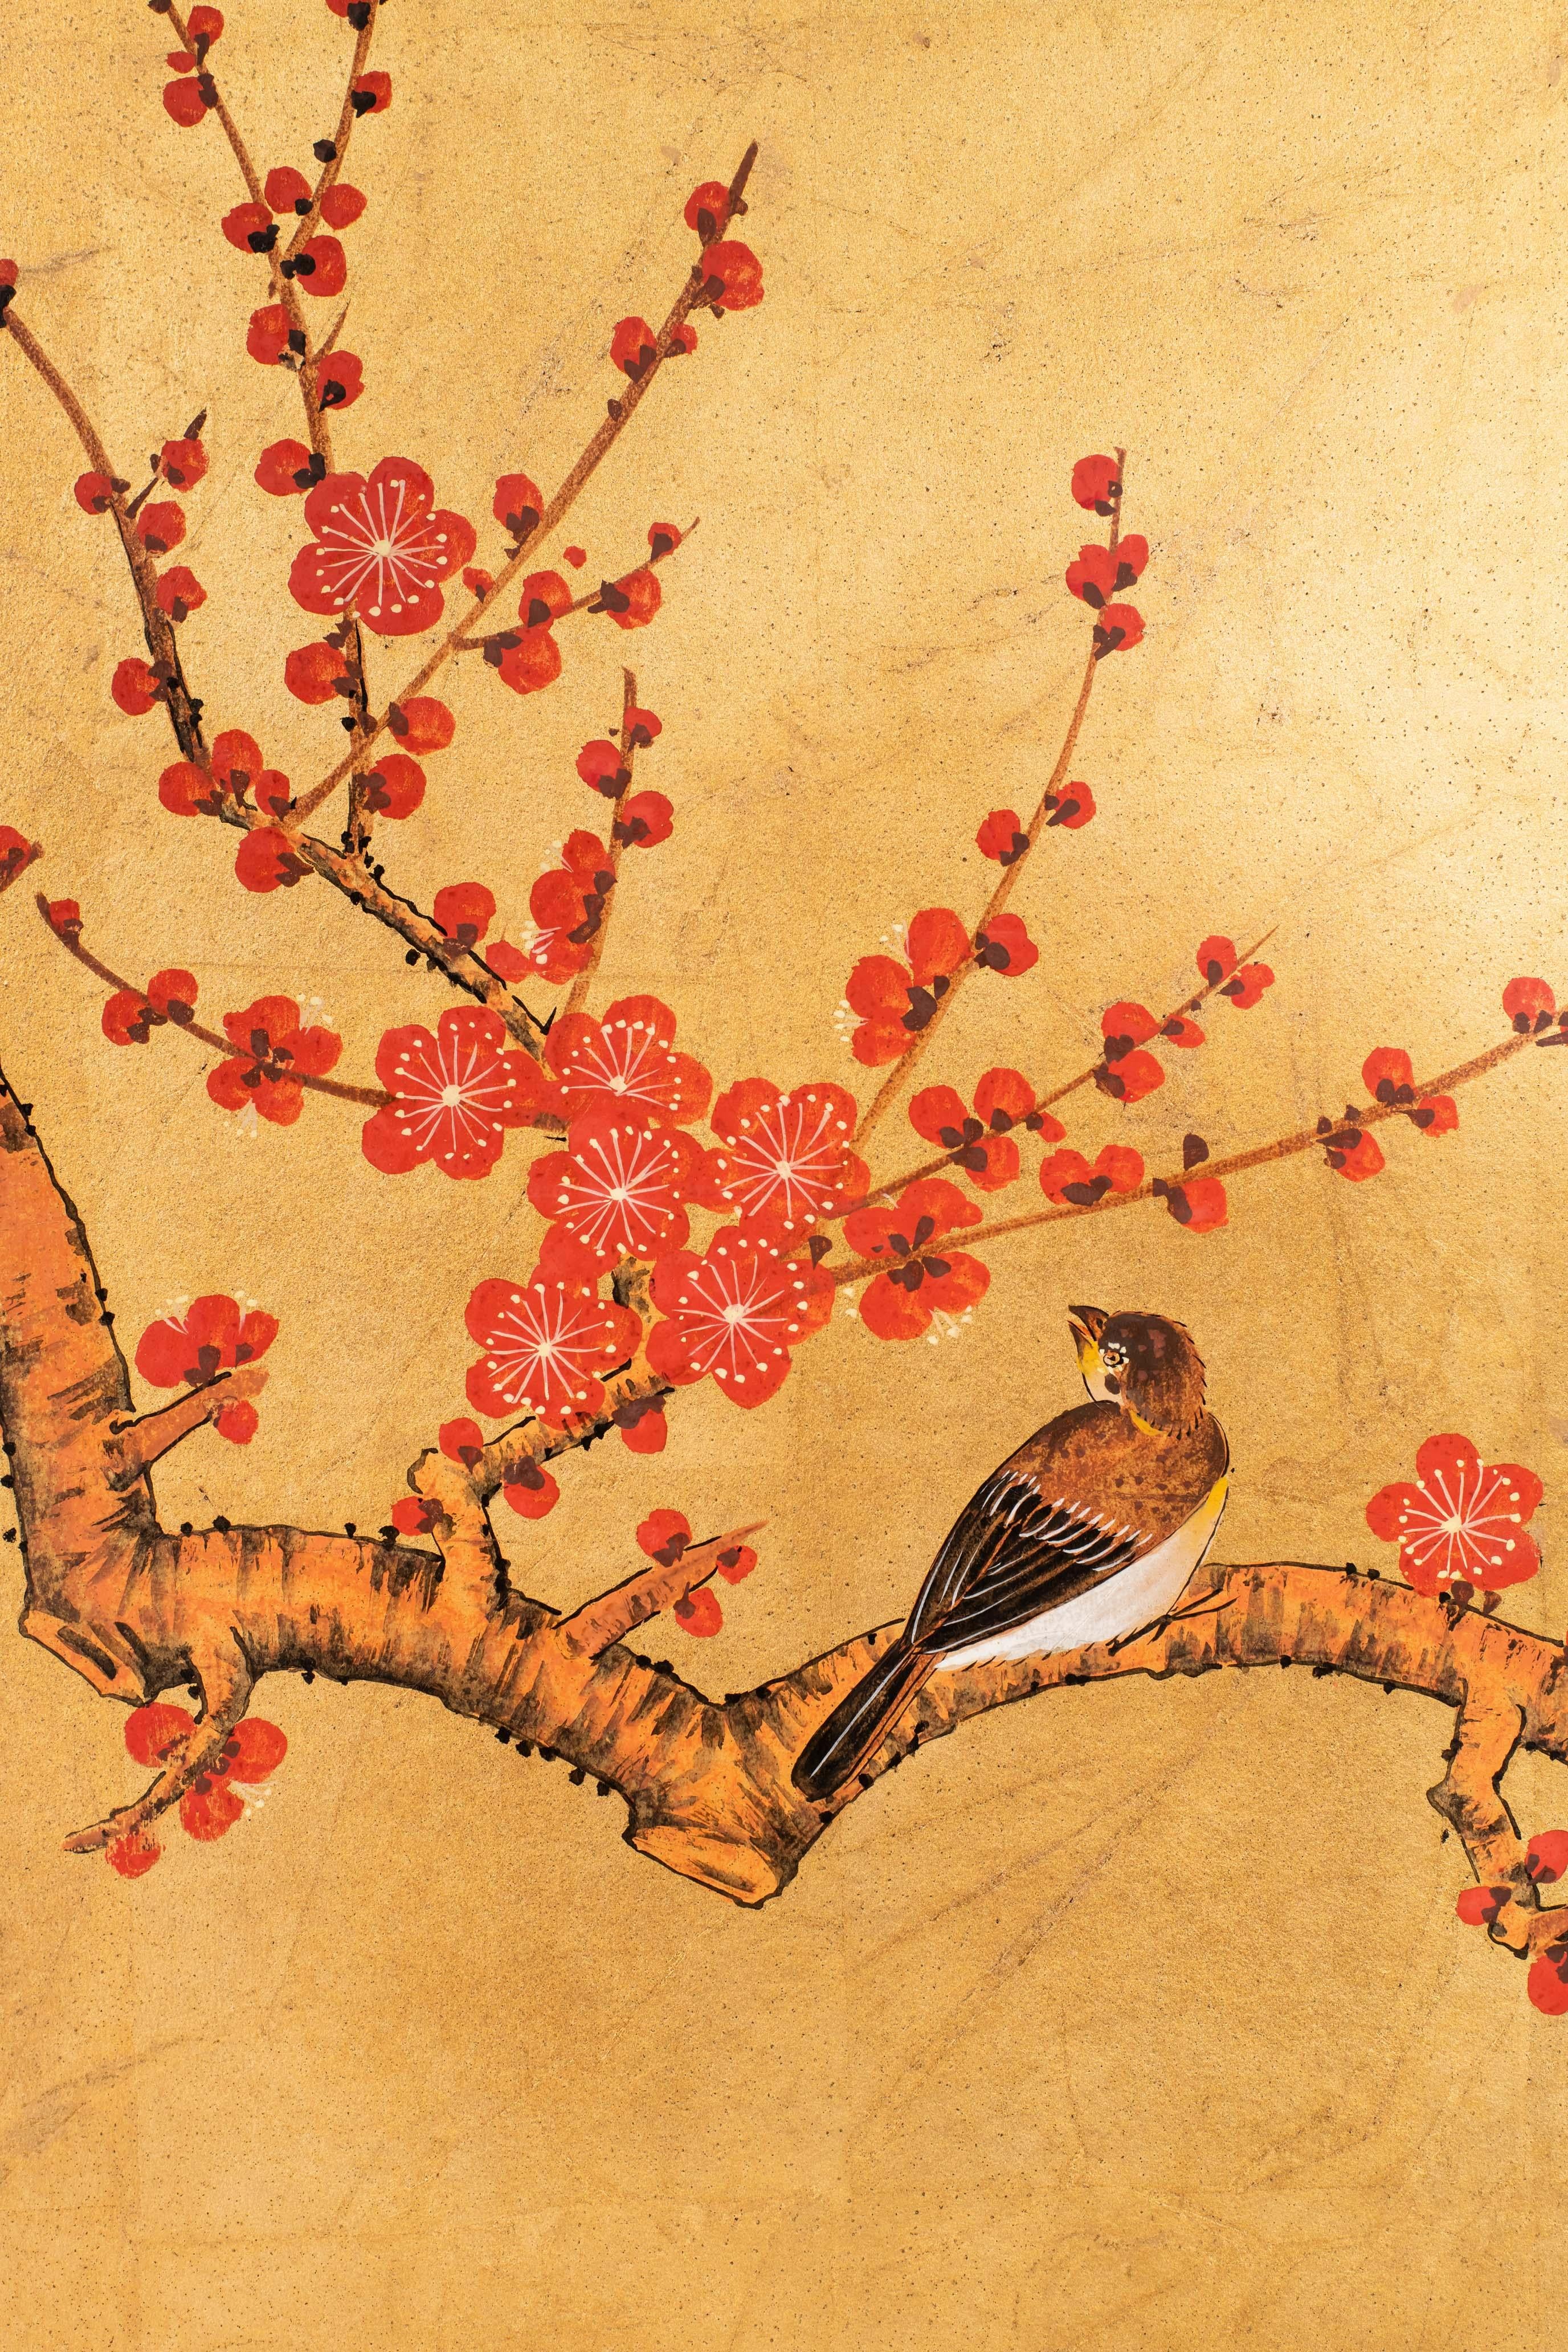 Hand-Crafted Contemporary Hand-Painted Japanese Screen of Red Plum Blossom and Birds